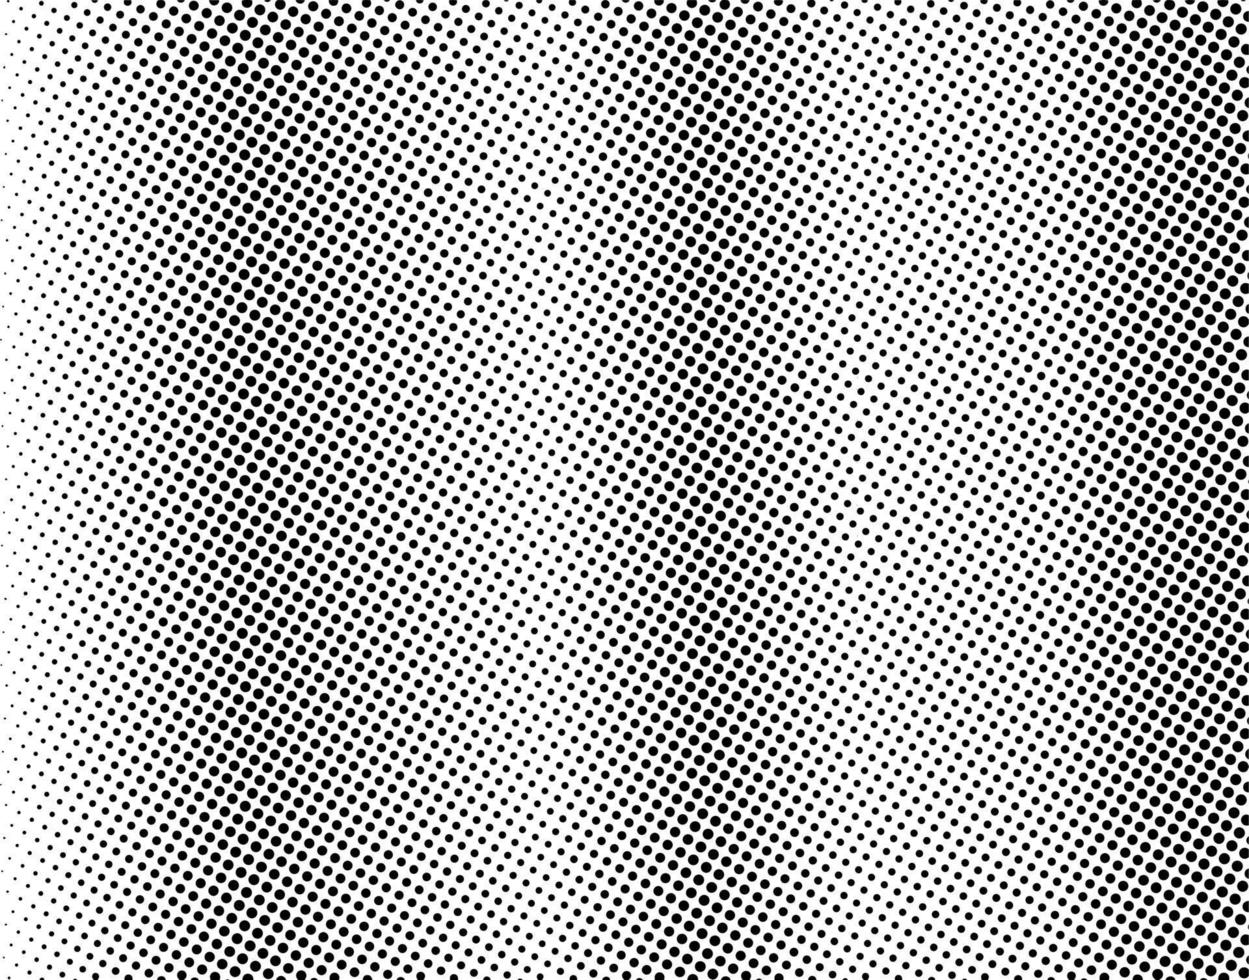 dot shape pattern, texture blue halftone, halftone circle dot, perforated abstract halftone, pattern, dotted vector, halftone, dot halftone circle, dotted background, halftone gradient, dot texture, vector